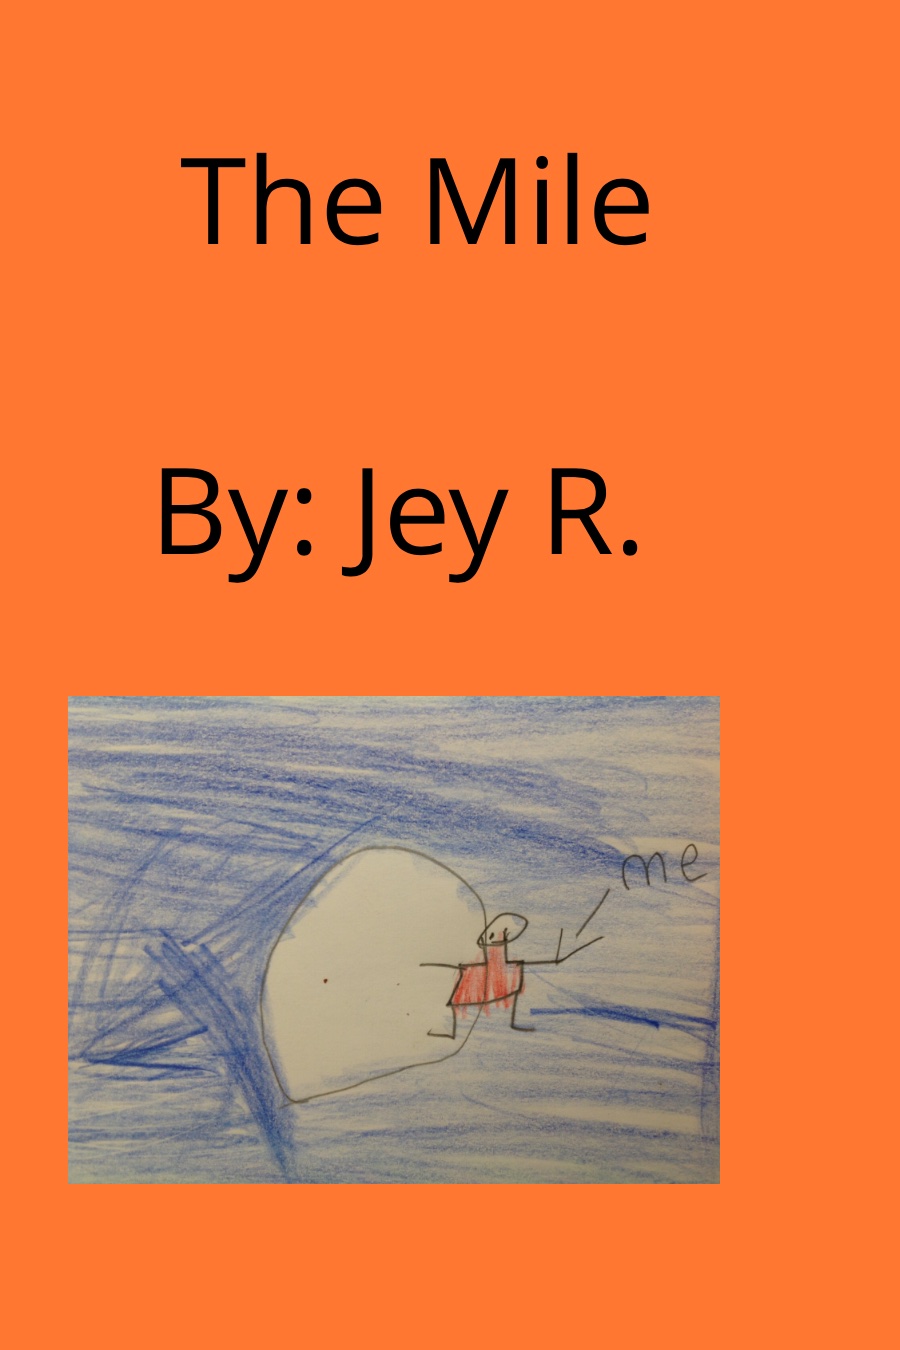 The Mile by Jey R